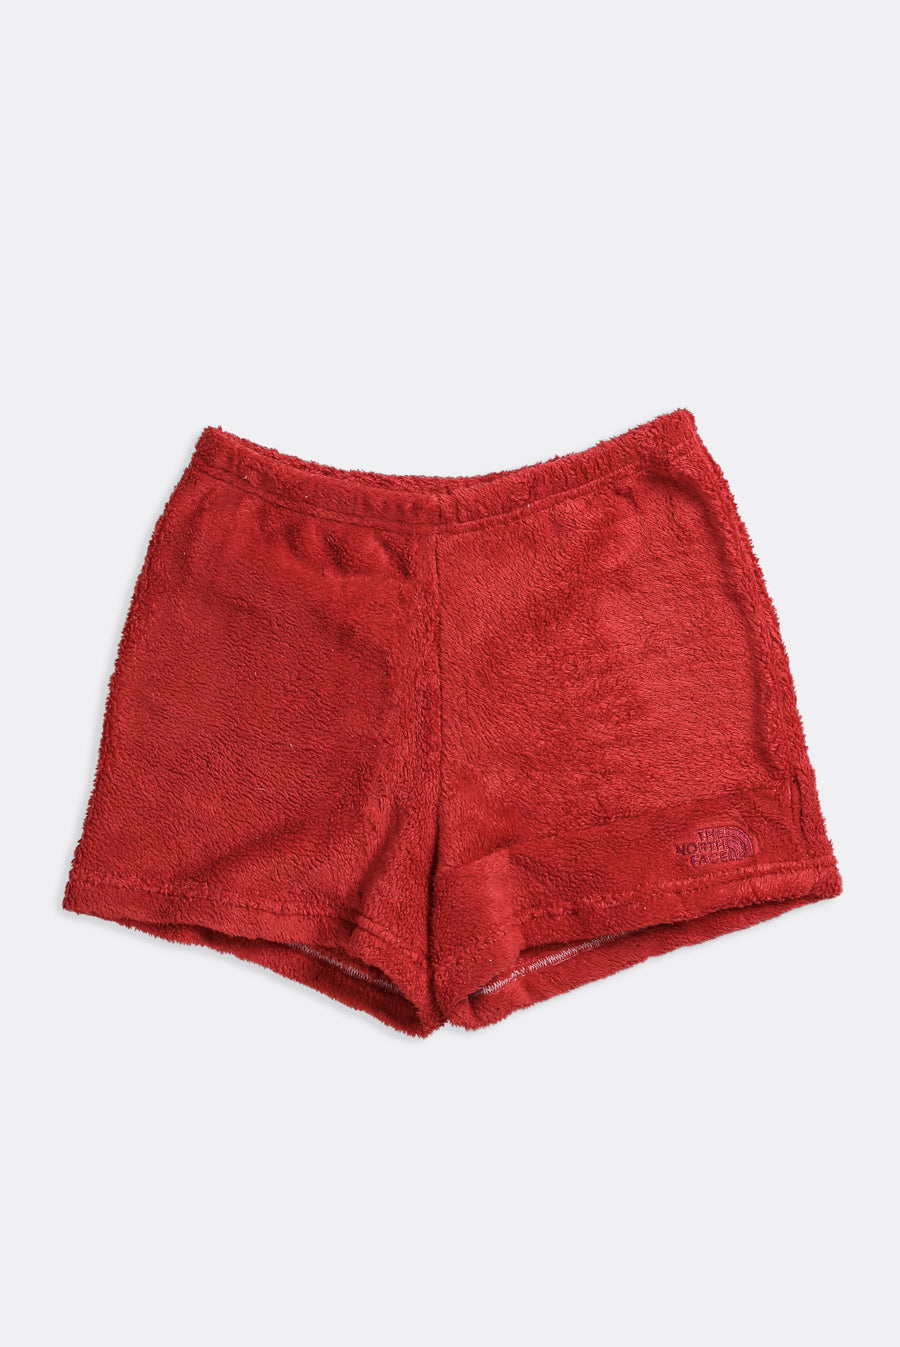 Rework North Face Fuzzy Shorts - XS